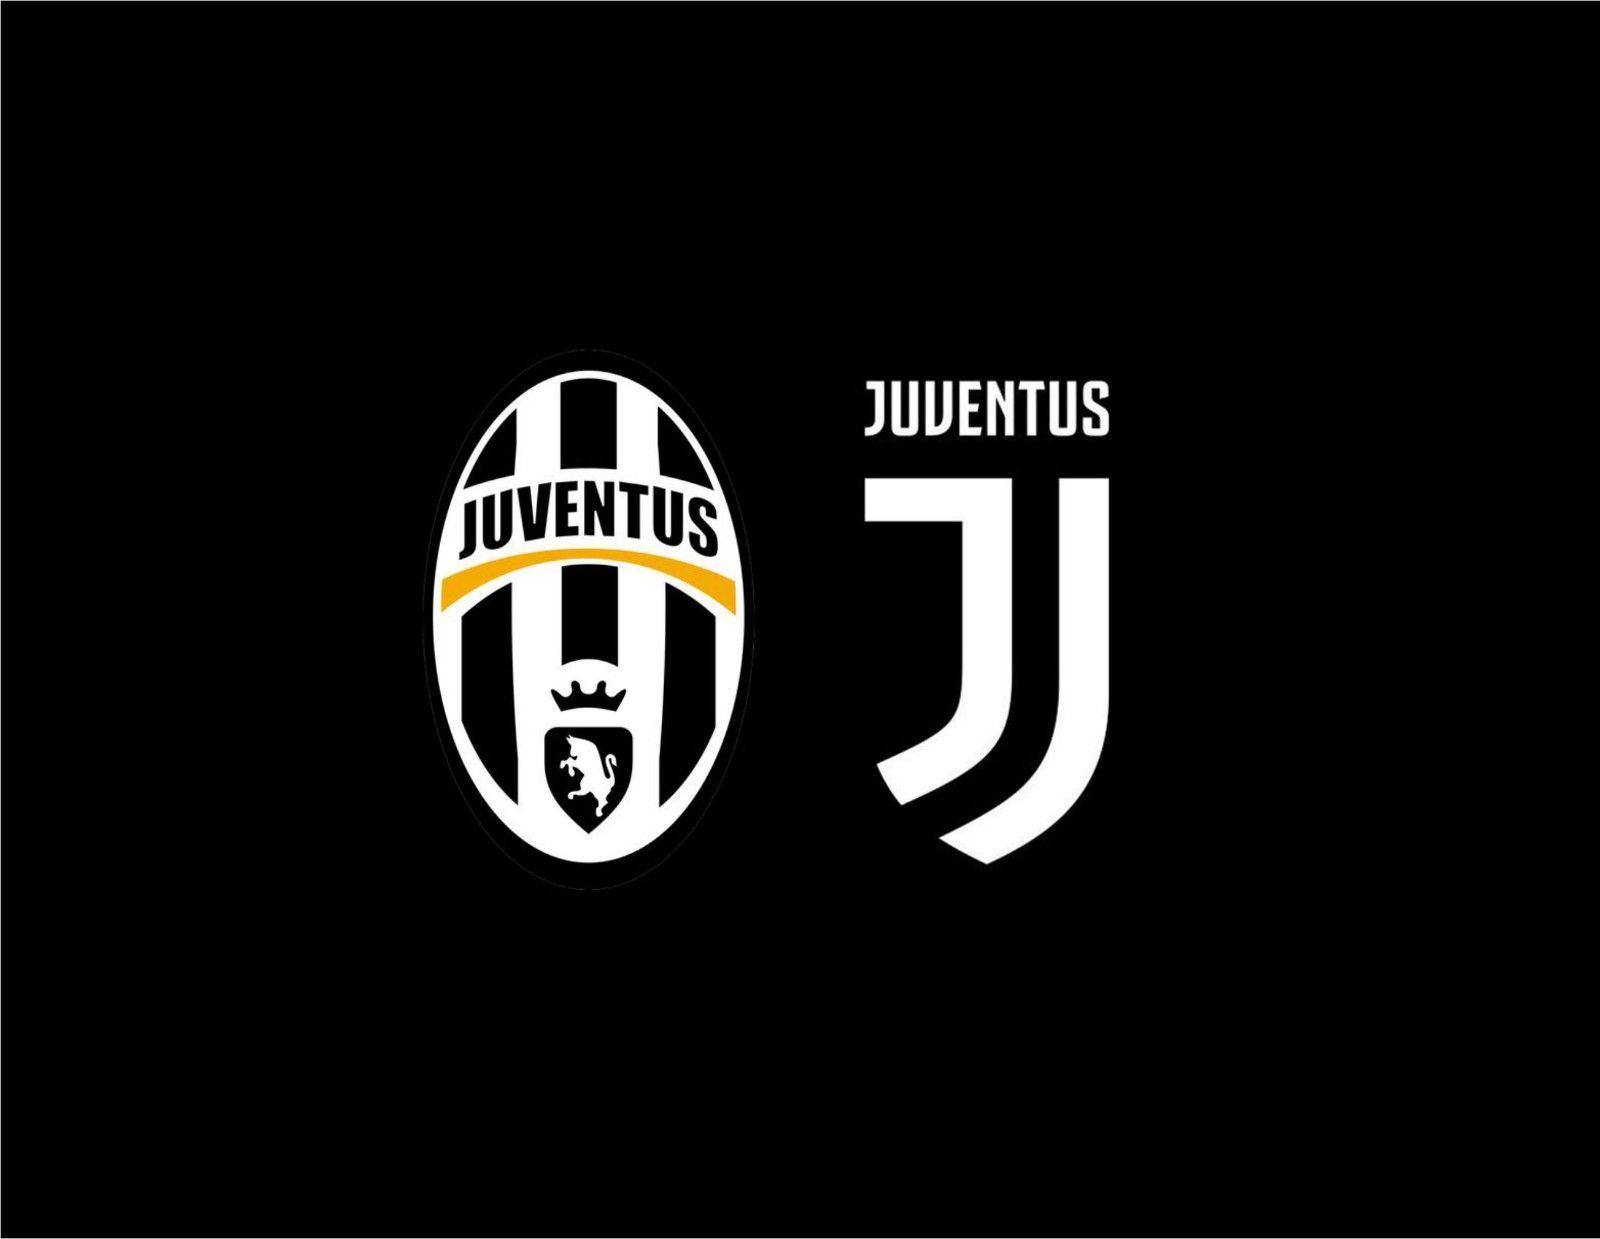 Official Business Logo - Juventus FC New Logo: Beyond the Beauty of a Badge #4CLogoReview